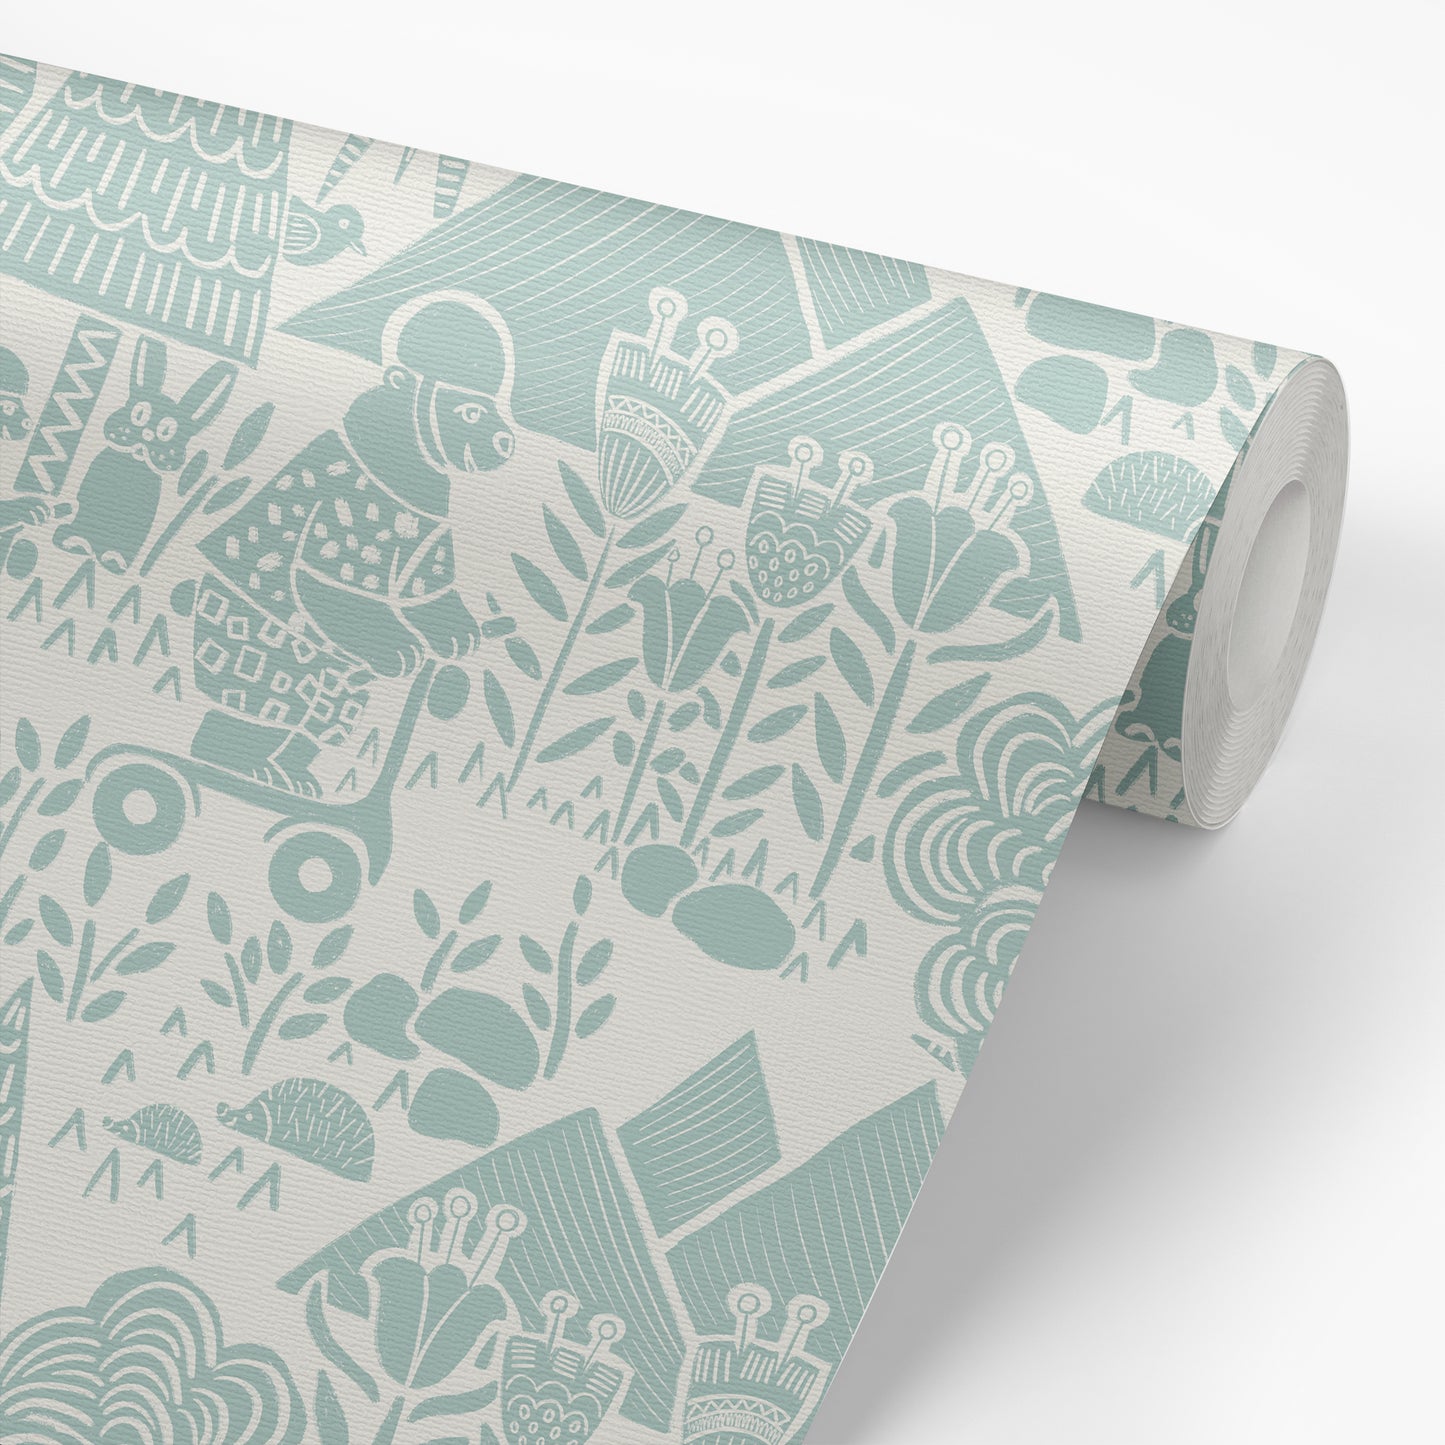 Scooting Bears Wallpaper in Sea Green shown on a roll of wallpaper.